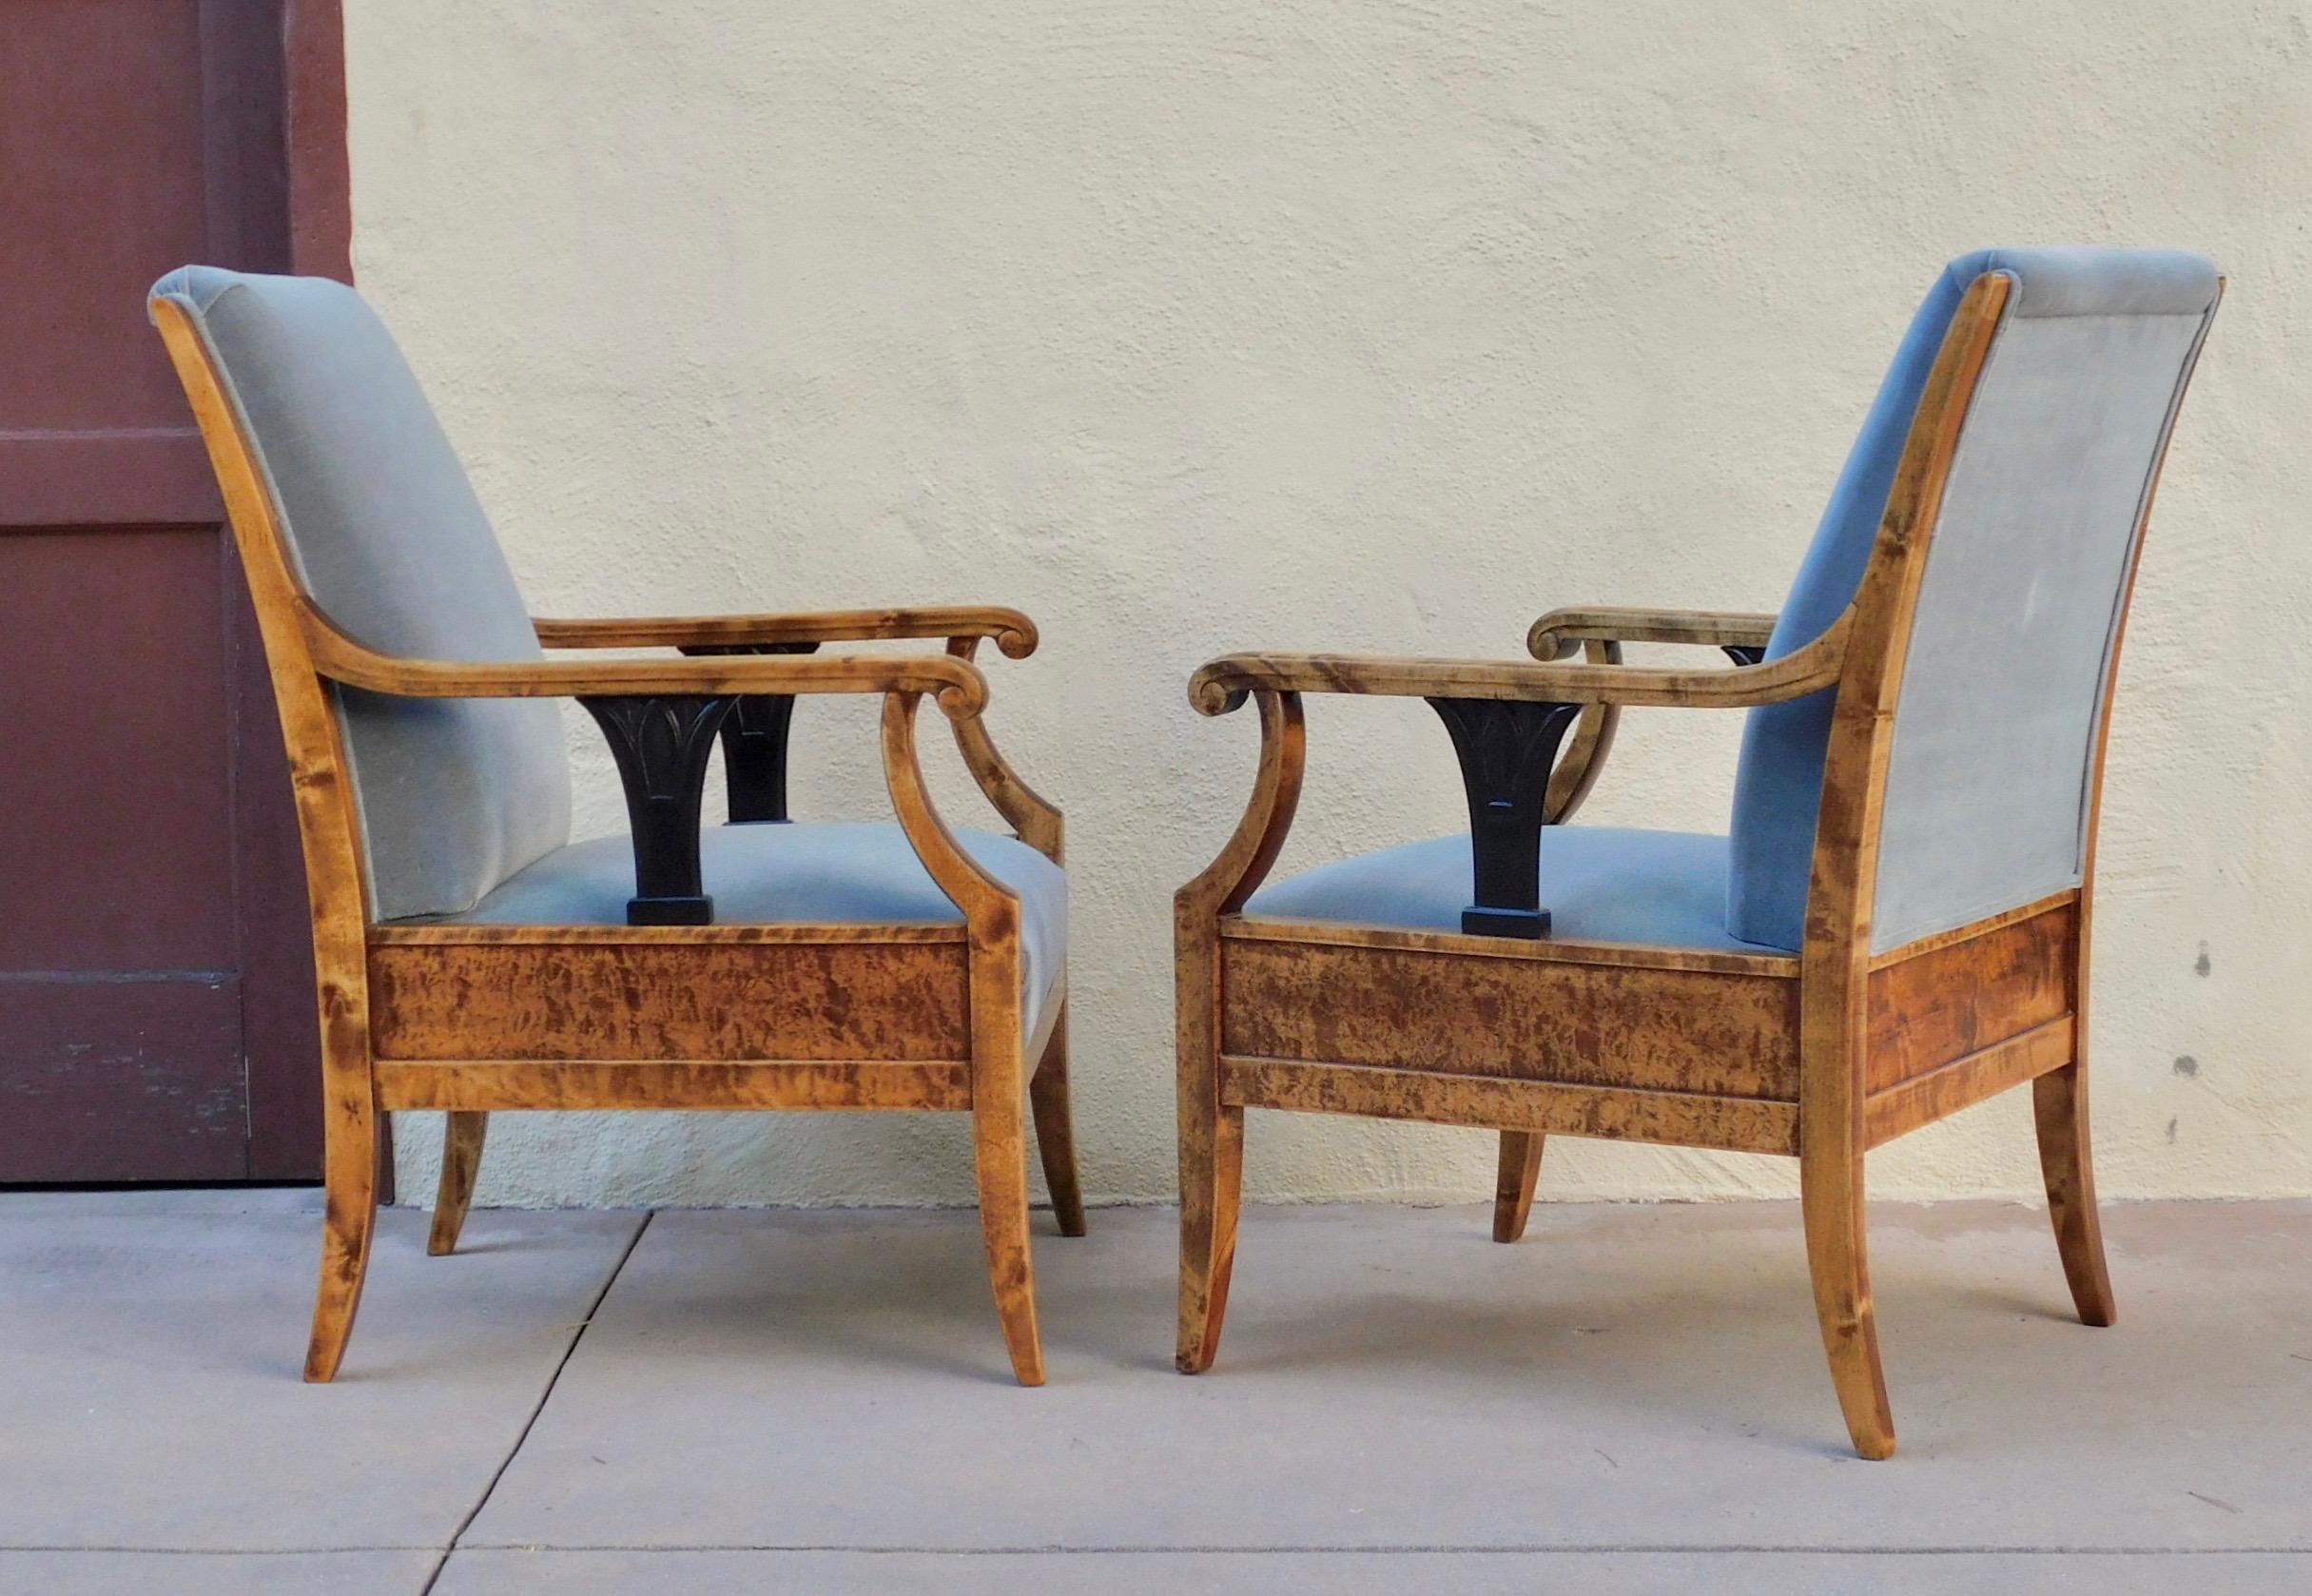 Pair of Swedish Biedermeier Revival Armchairs in Golden Flame Birch, circa 1920 In Excellent Condition For Sale In Richmond, VA